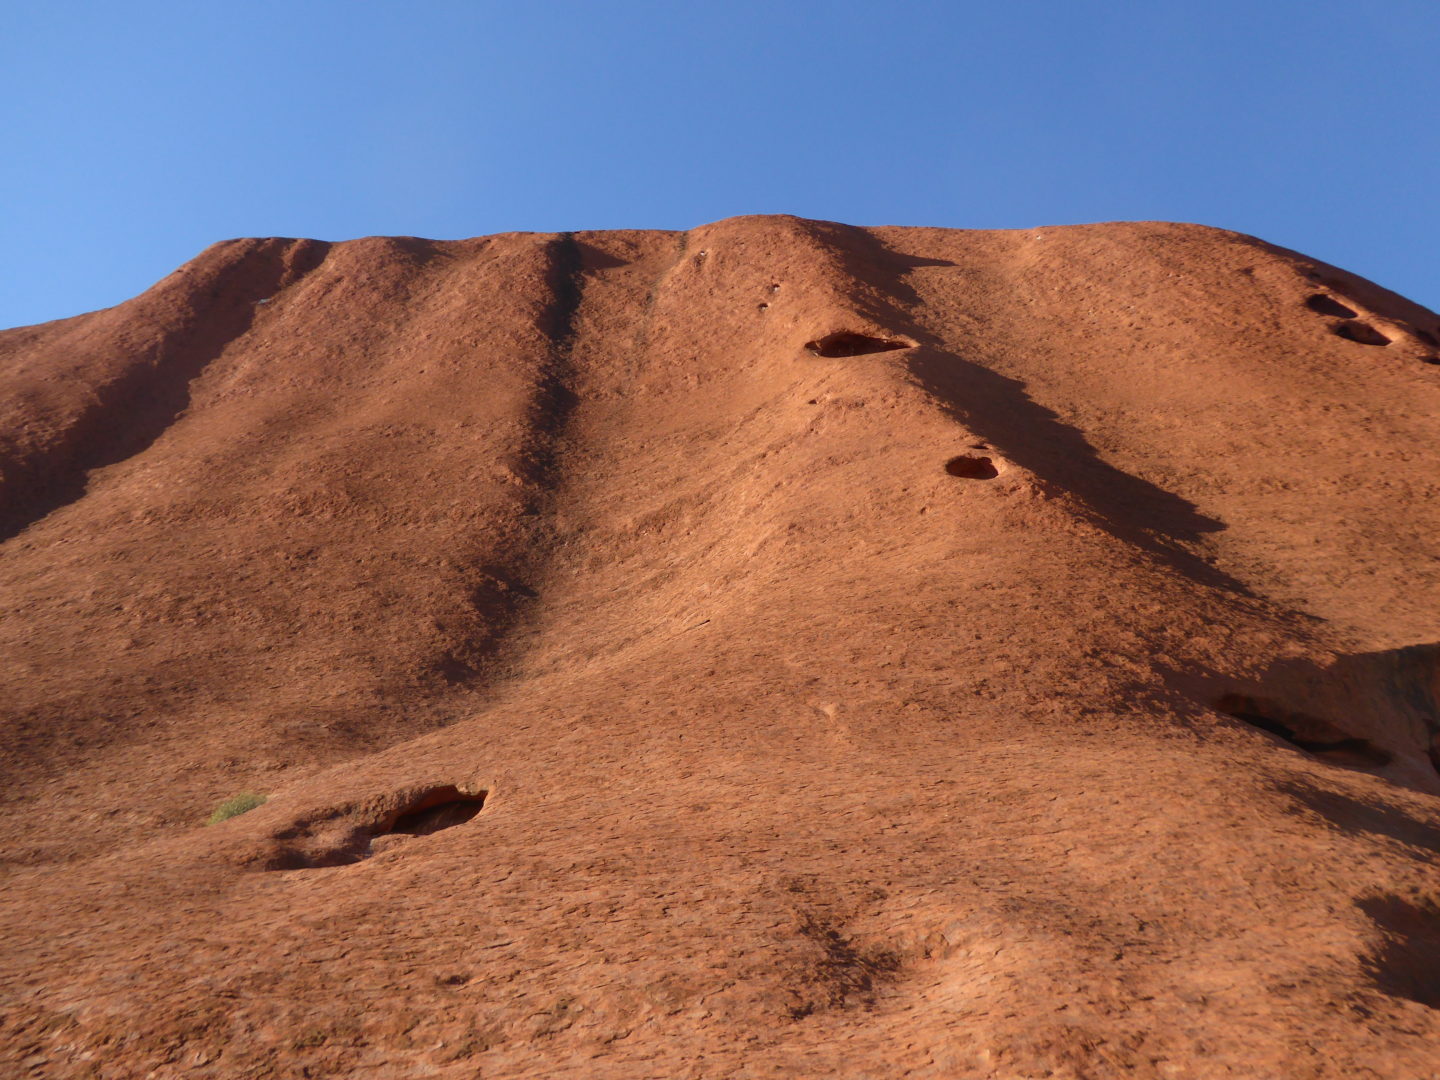 Close up of the surface of Uluru Ayers Rock in Australia